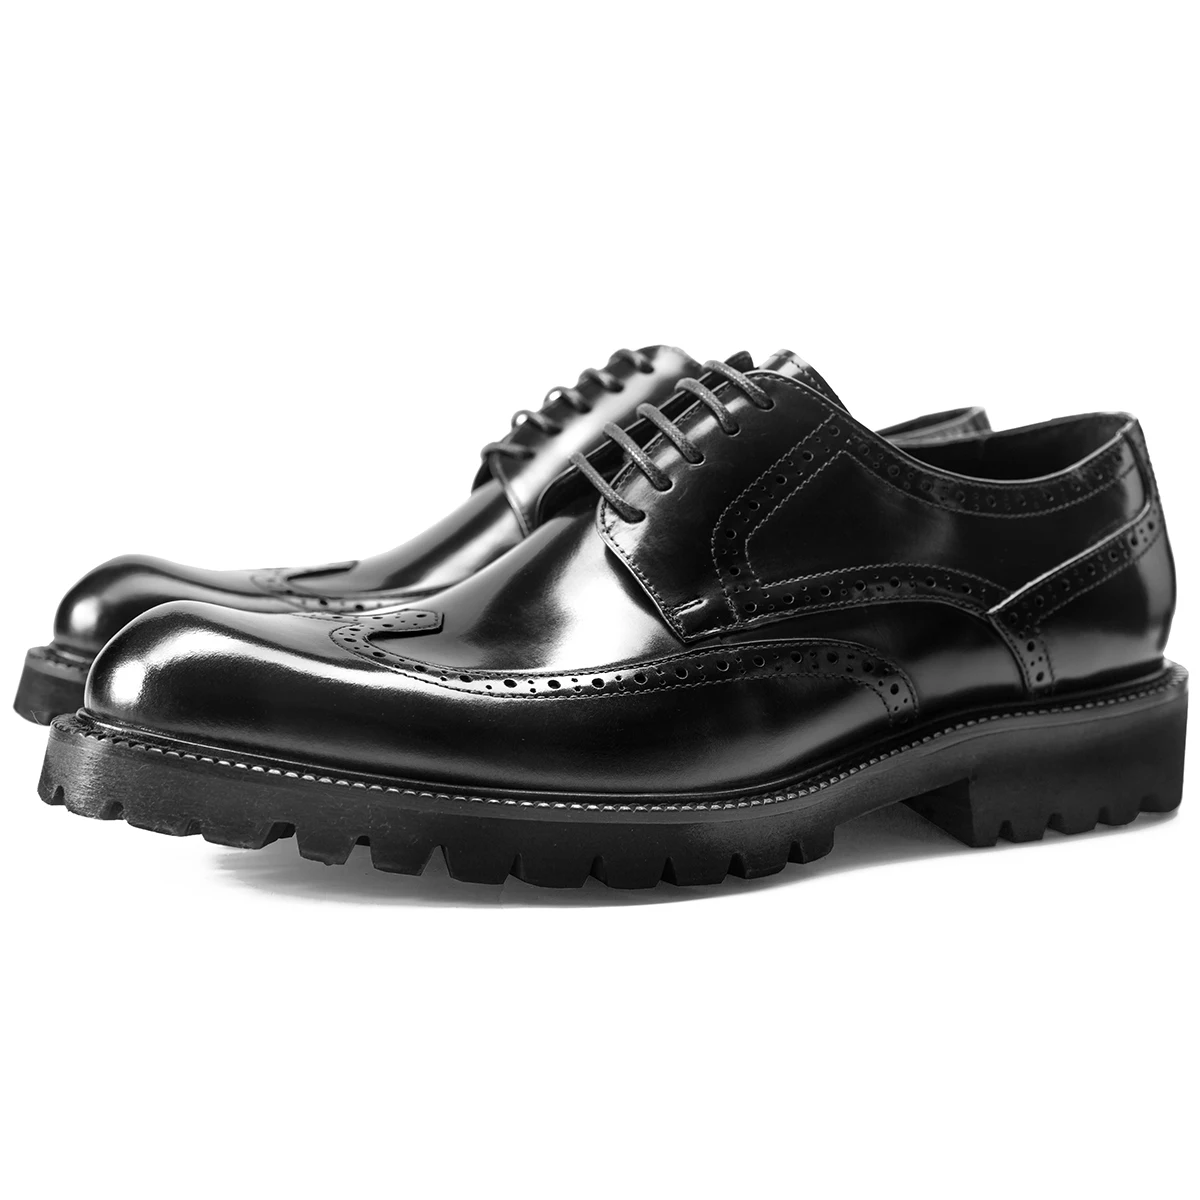 

Handmade Genuine Leather Shoe New Brogue Carved Business Dress Footwear Mens Black Casual Increase British Lace-Up Derby Shoes